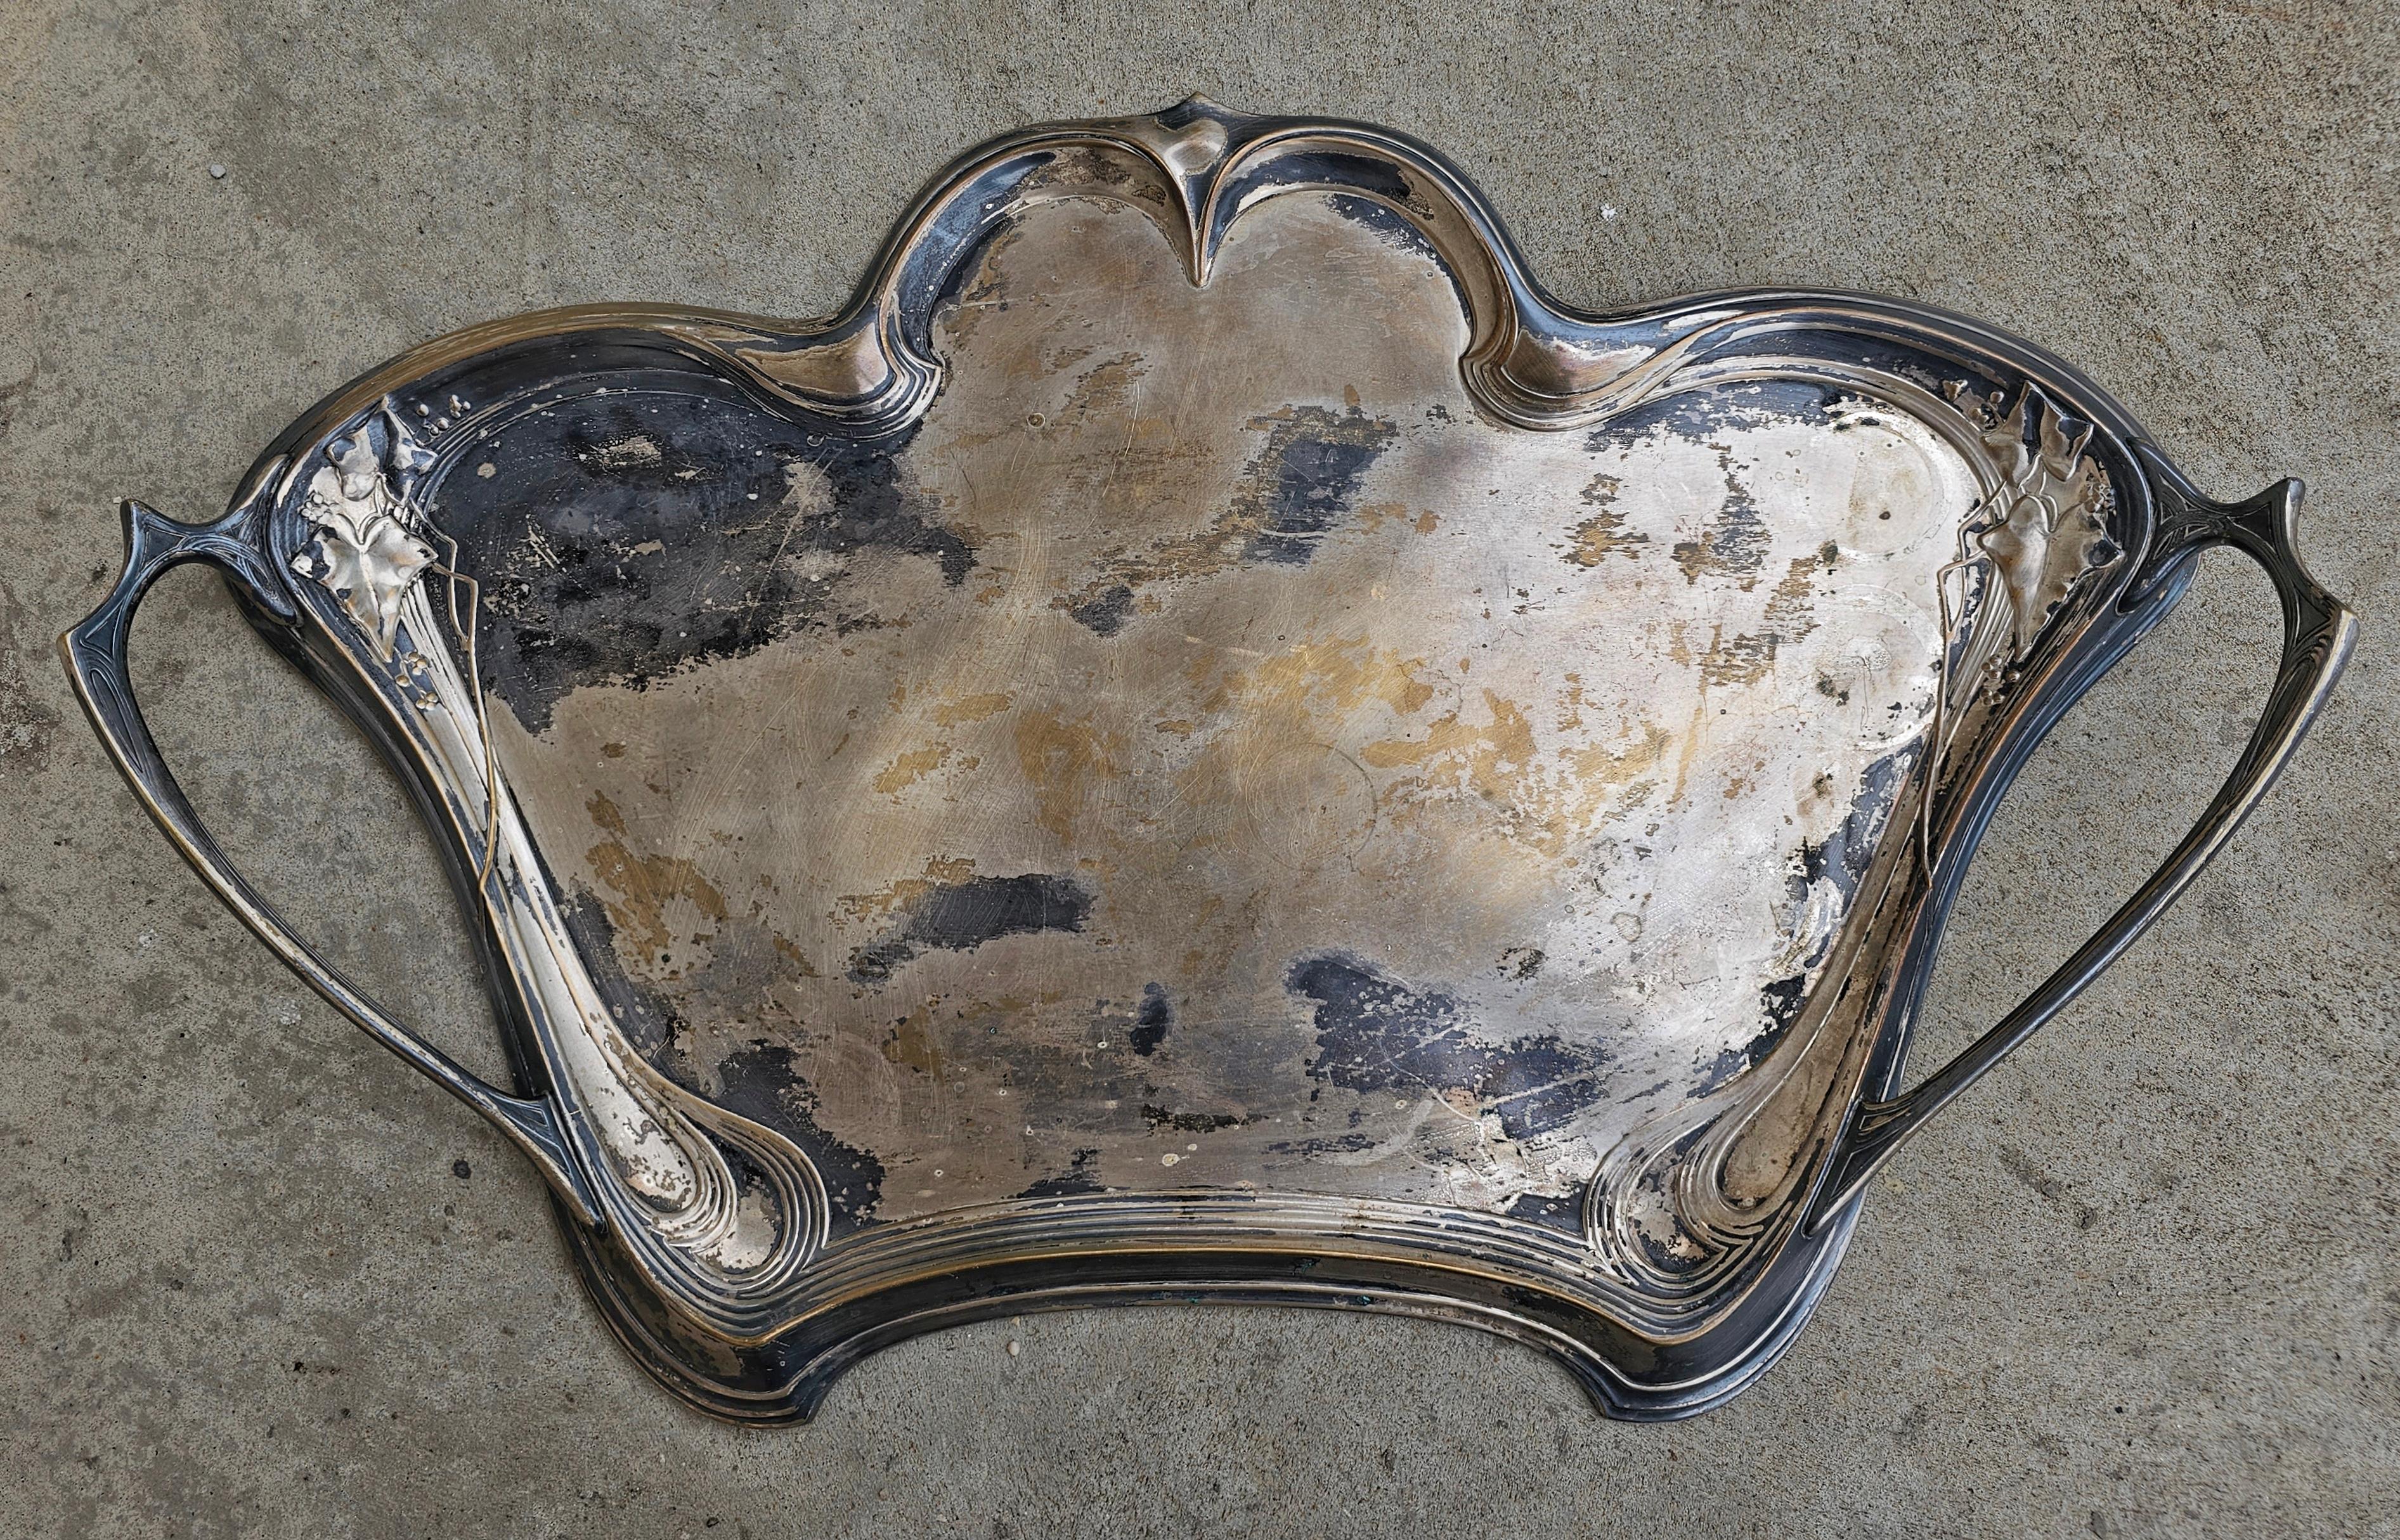 In this listing you will find an extremally rare German WMF Art Nouveau silver plated handled waiter's tray with berry and ivy foliage relief with Art Nouveau patterns and decorative handles. This beautiful tray fits neatly into the waist of the